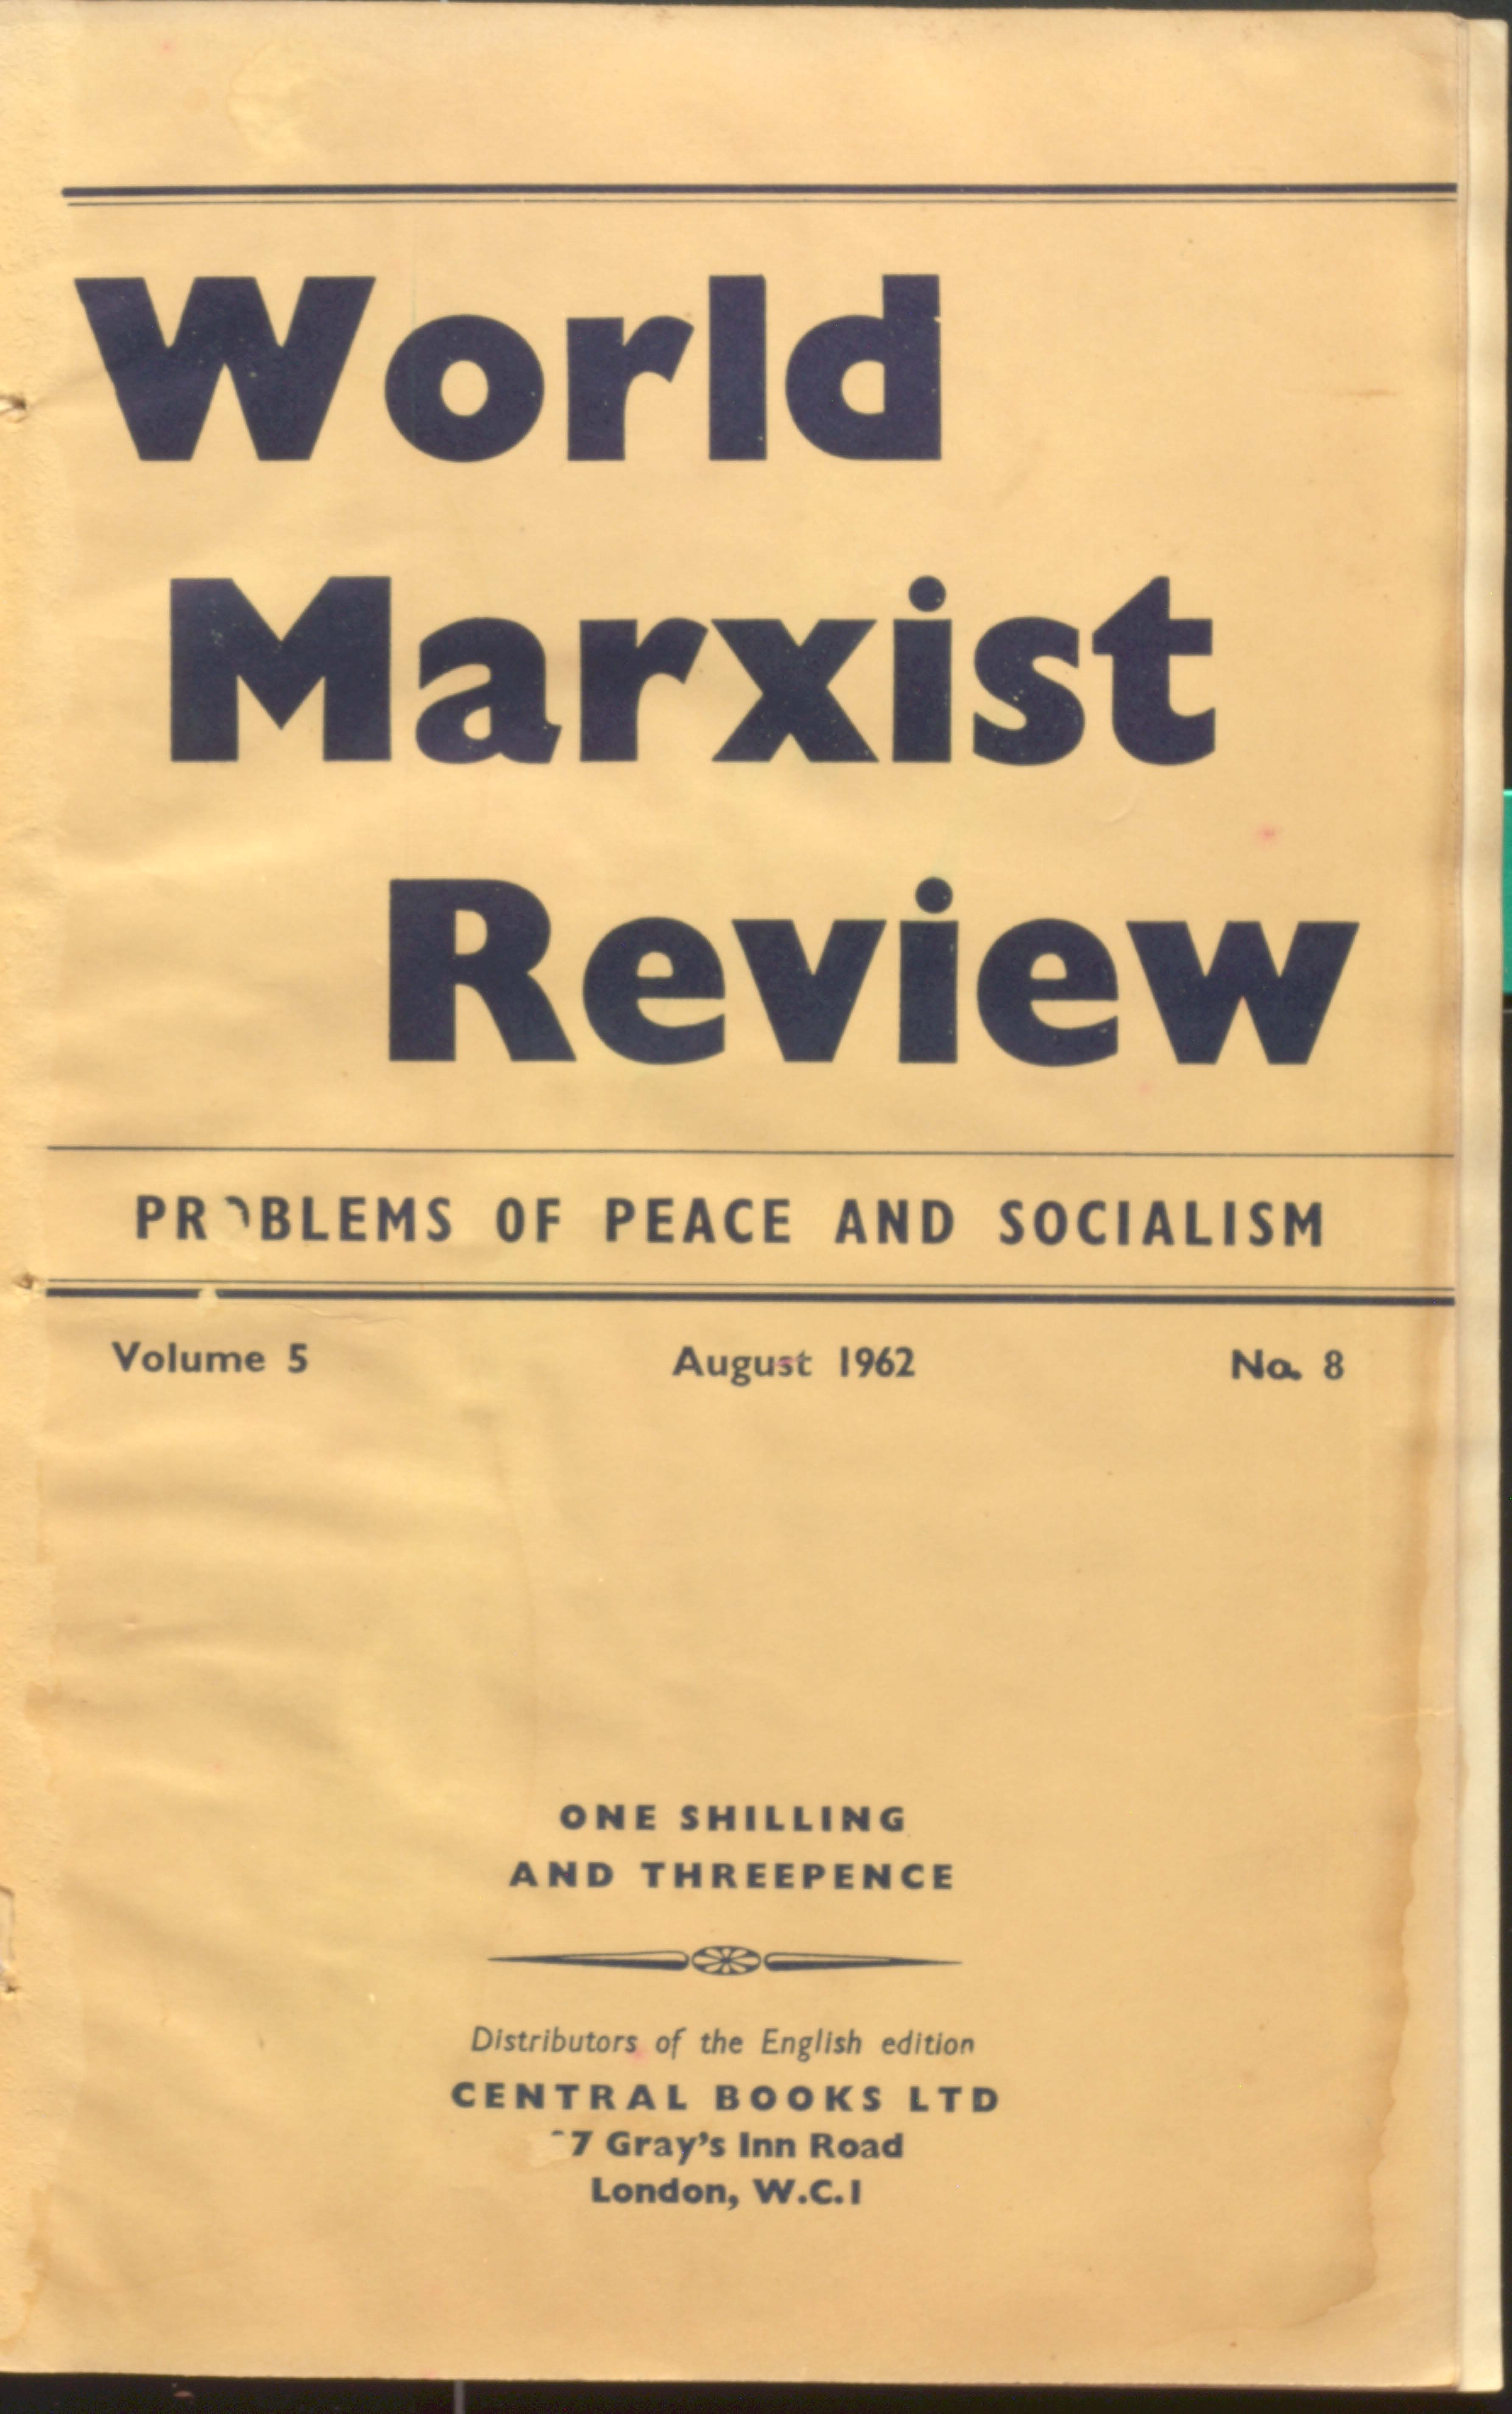 World marxist review (v-5 august-1982)